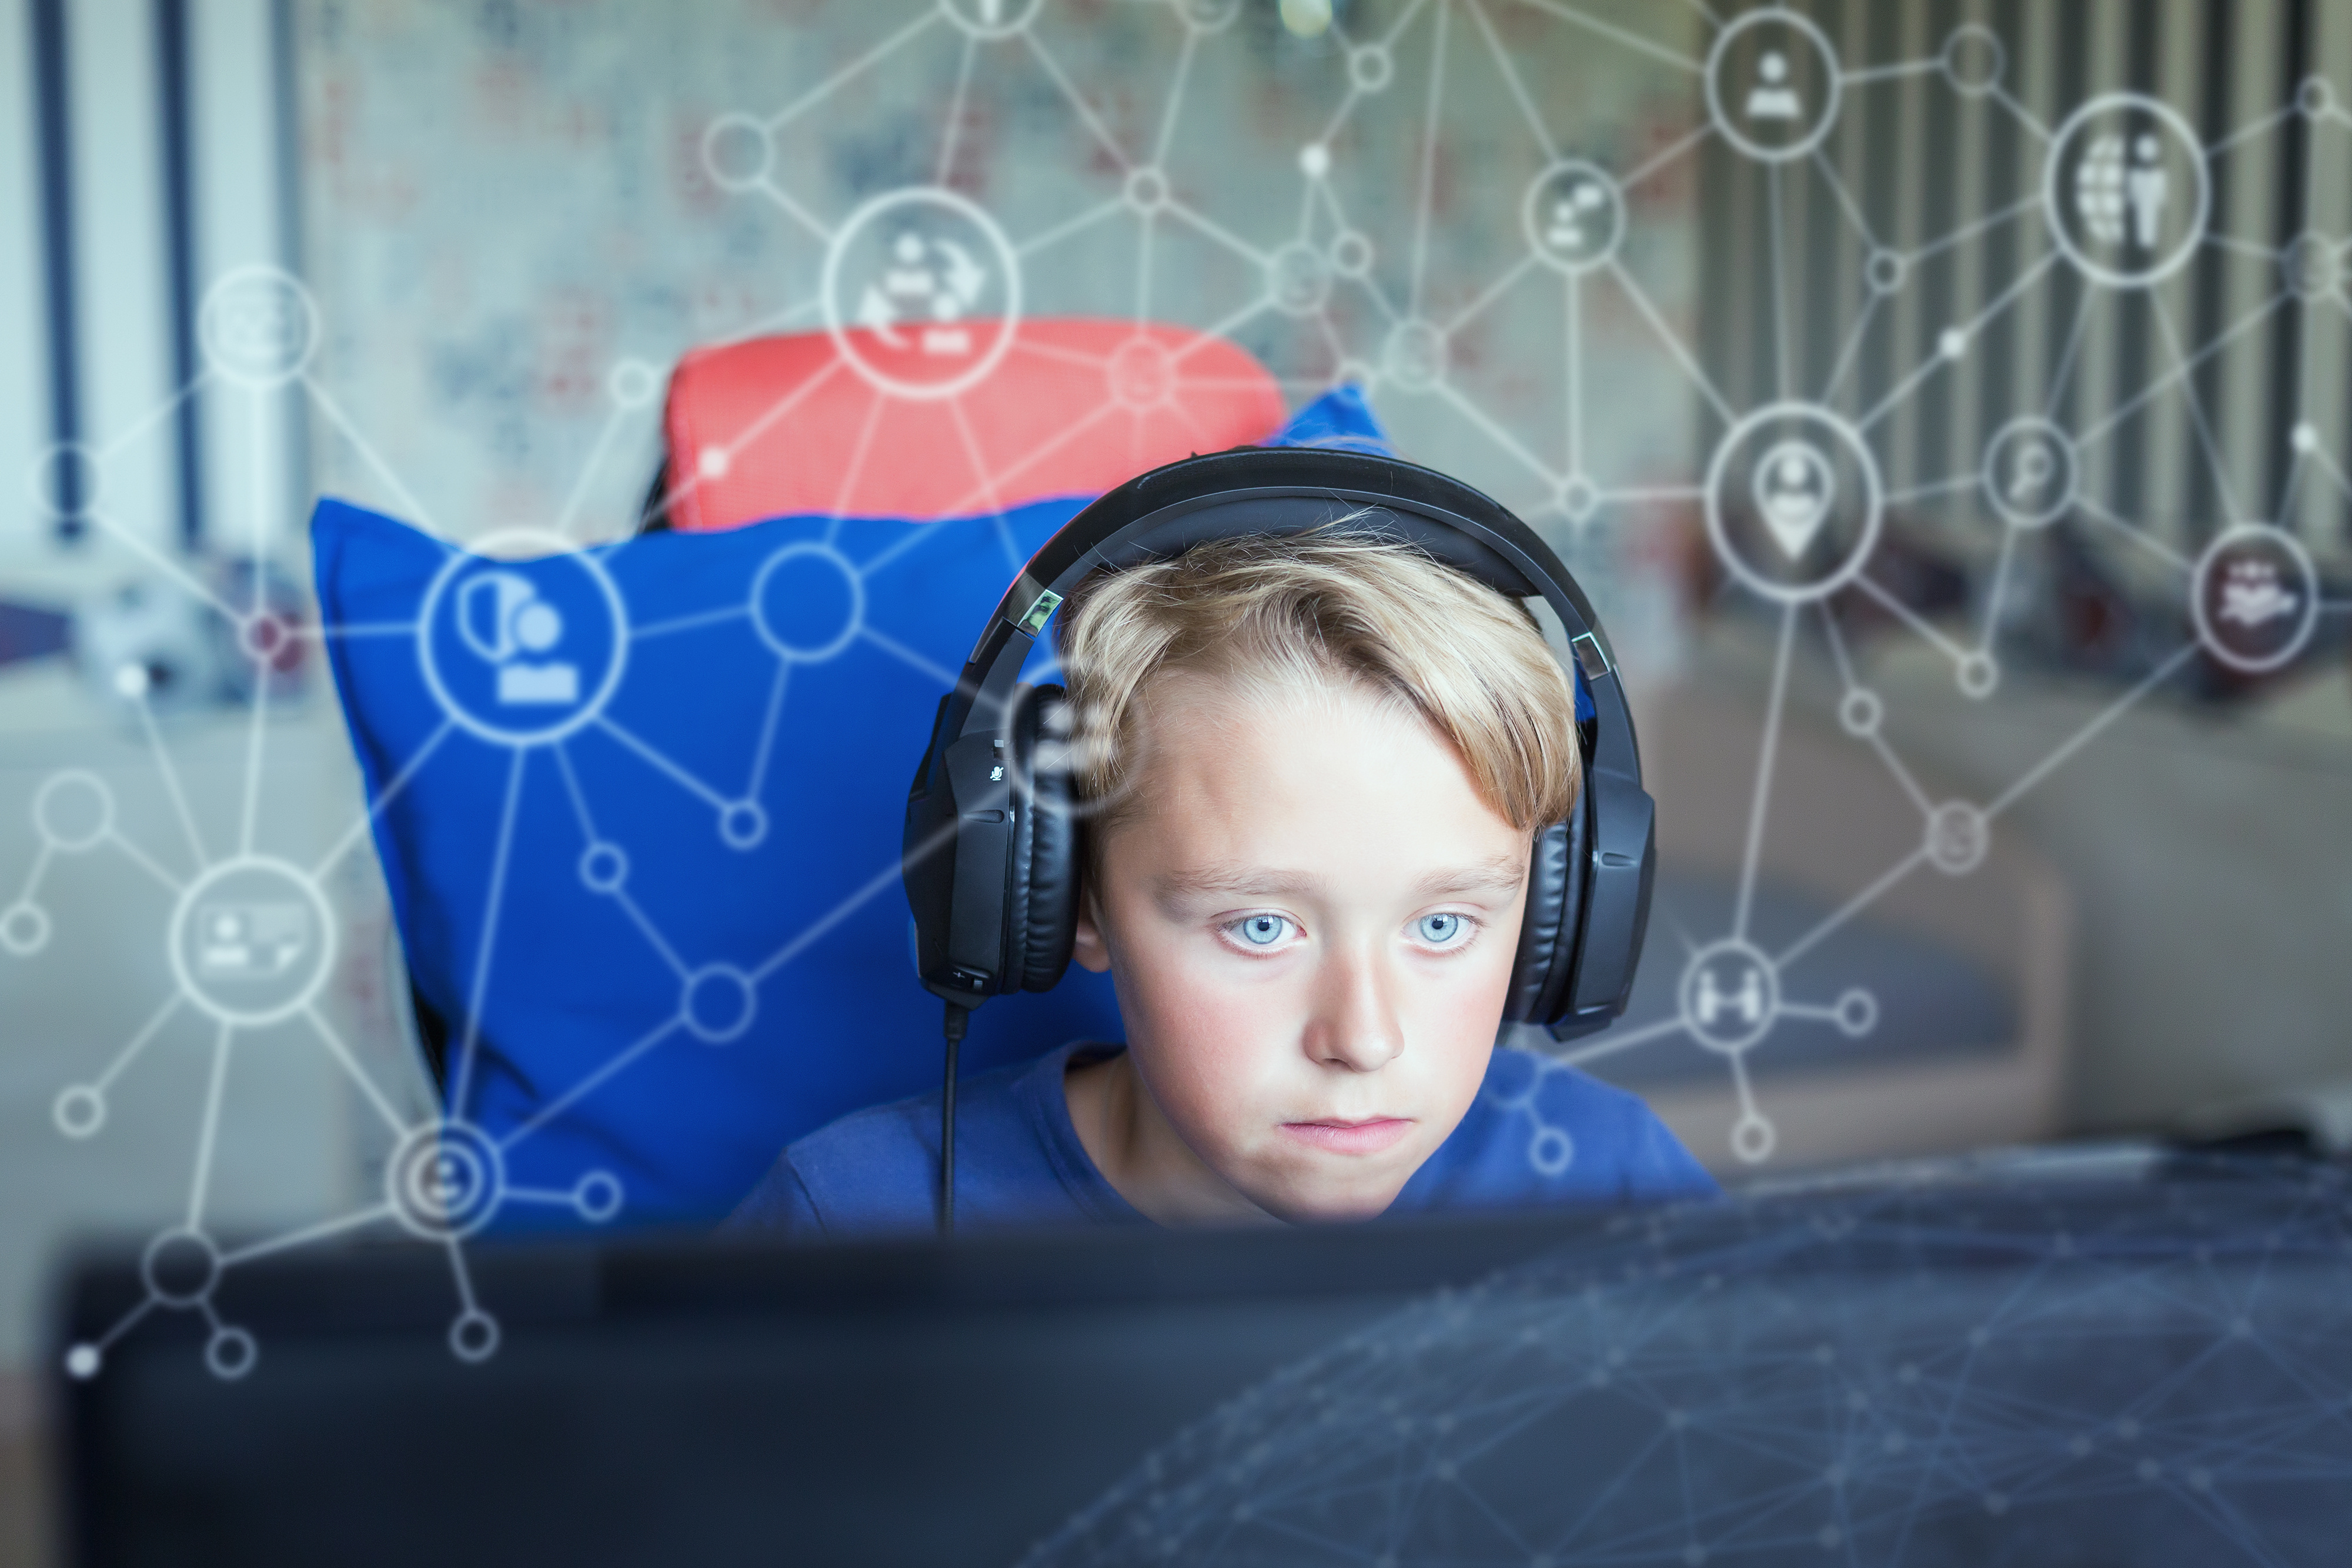 Child with headphones in front of a computer